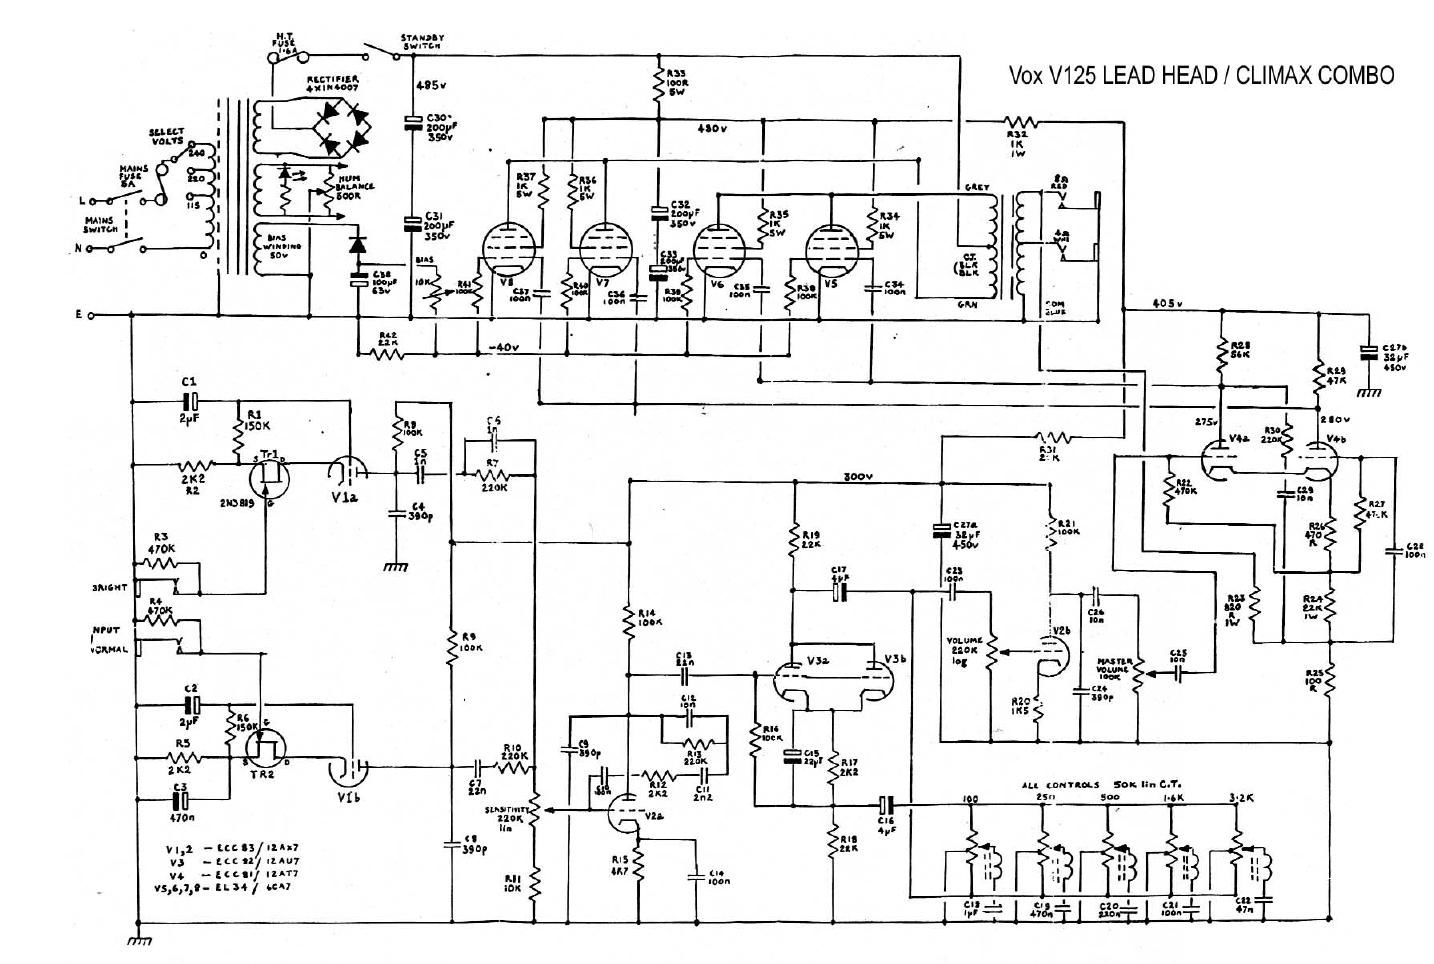 vox v125 lead head climax combo schematic